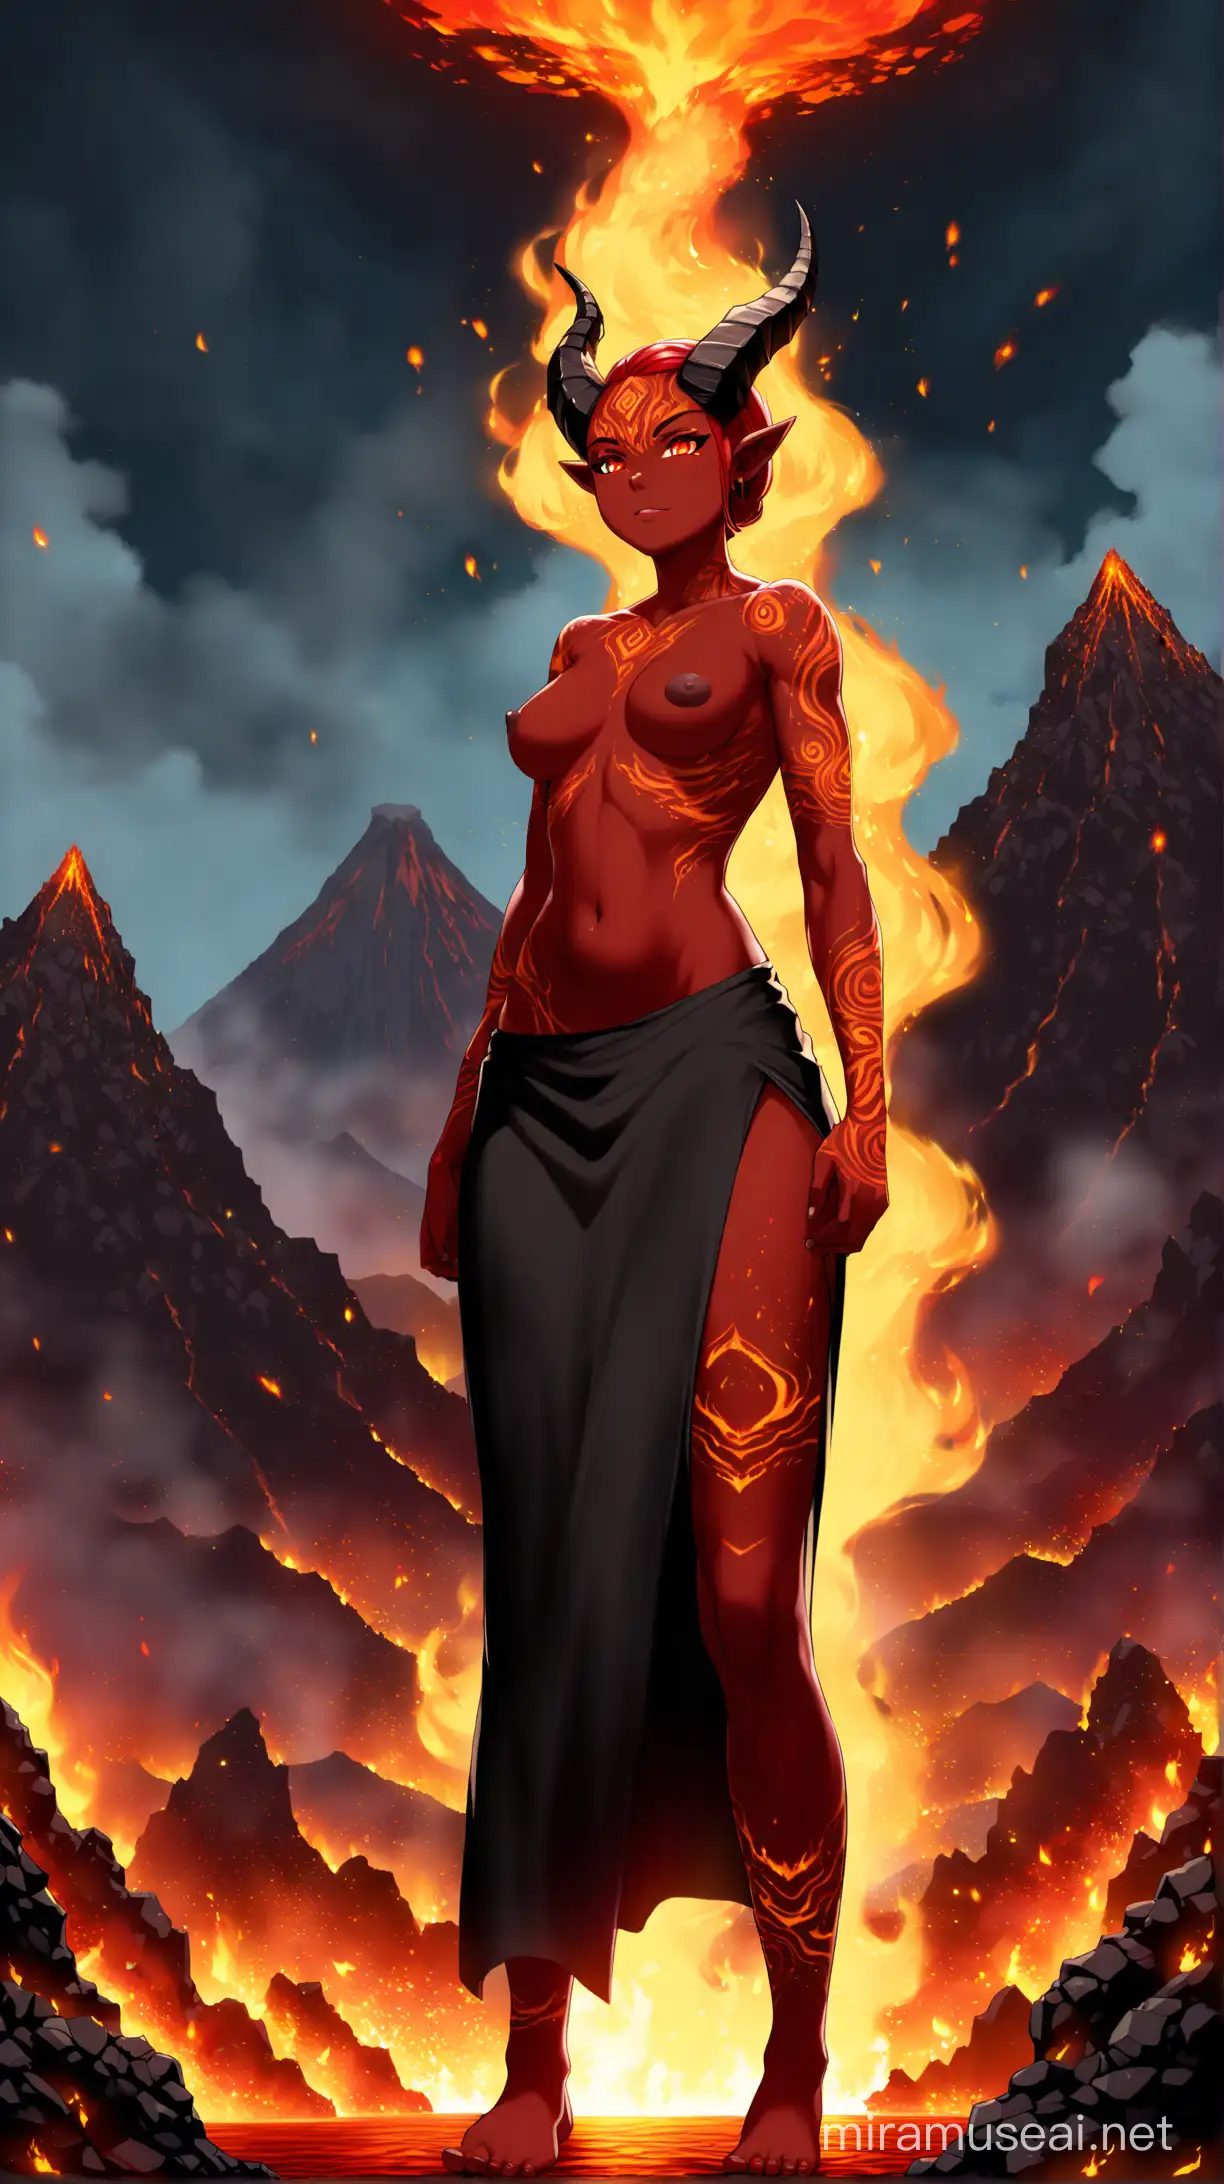 Volcanic Fire Elemental Woman with Glowing Eyes and Horns